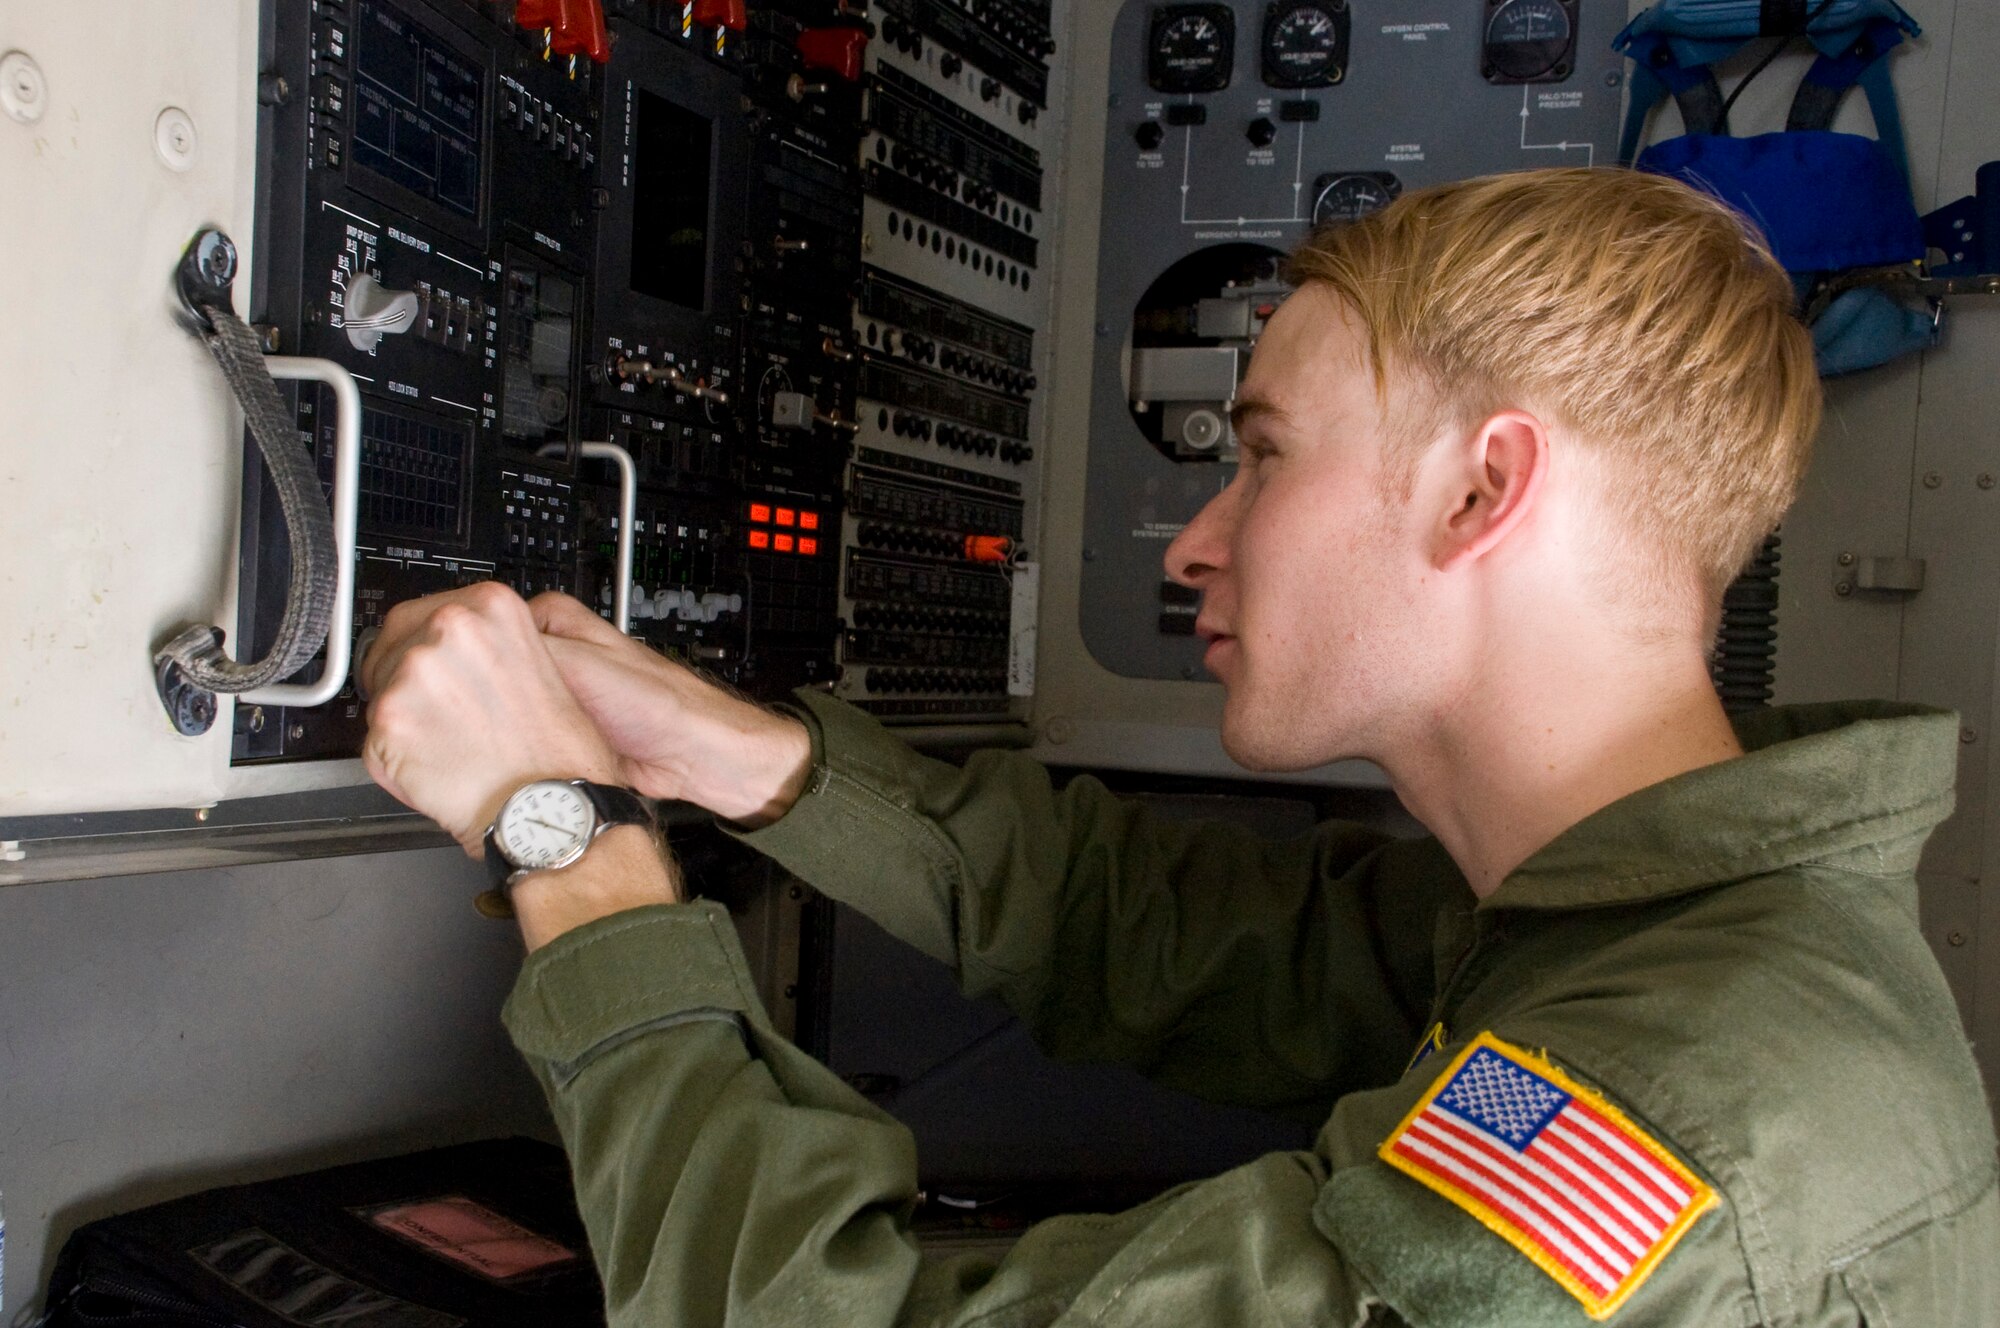 Senior Airman Austin Frazier, a loadmaster with the 3rd Airlift Squadron, demonstrates the capabilities of a cargo control panel inside a C-17 Globemaster III June 22, 2012, at Dover Air Force Base, Del. Loadmasters ensure that cargo is secure and properly packed before take-off and properly unloaded upon landing. (U.S. Air Force photo by Senior Airman Matthew Hubby)